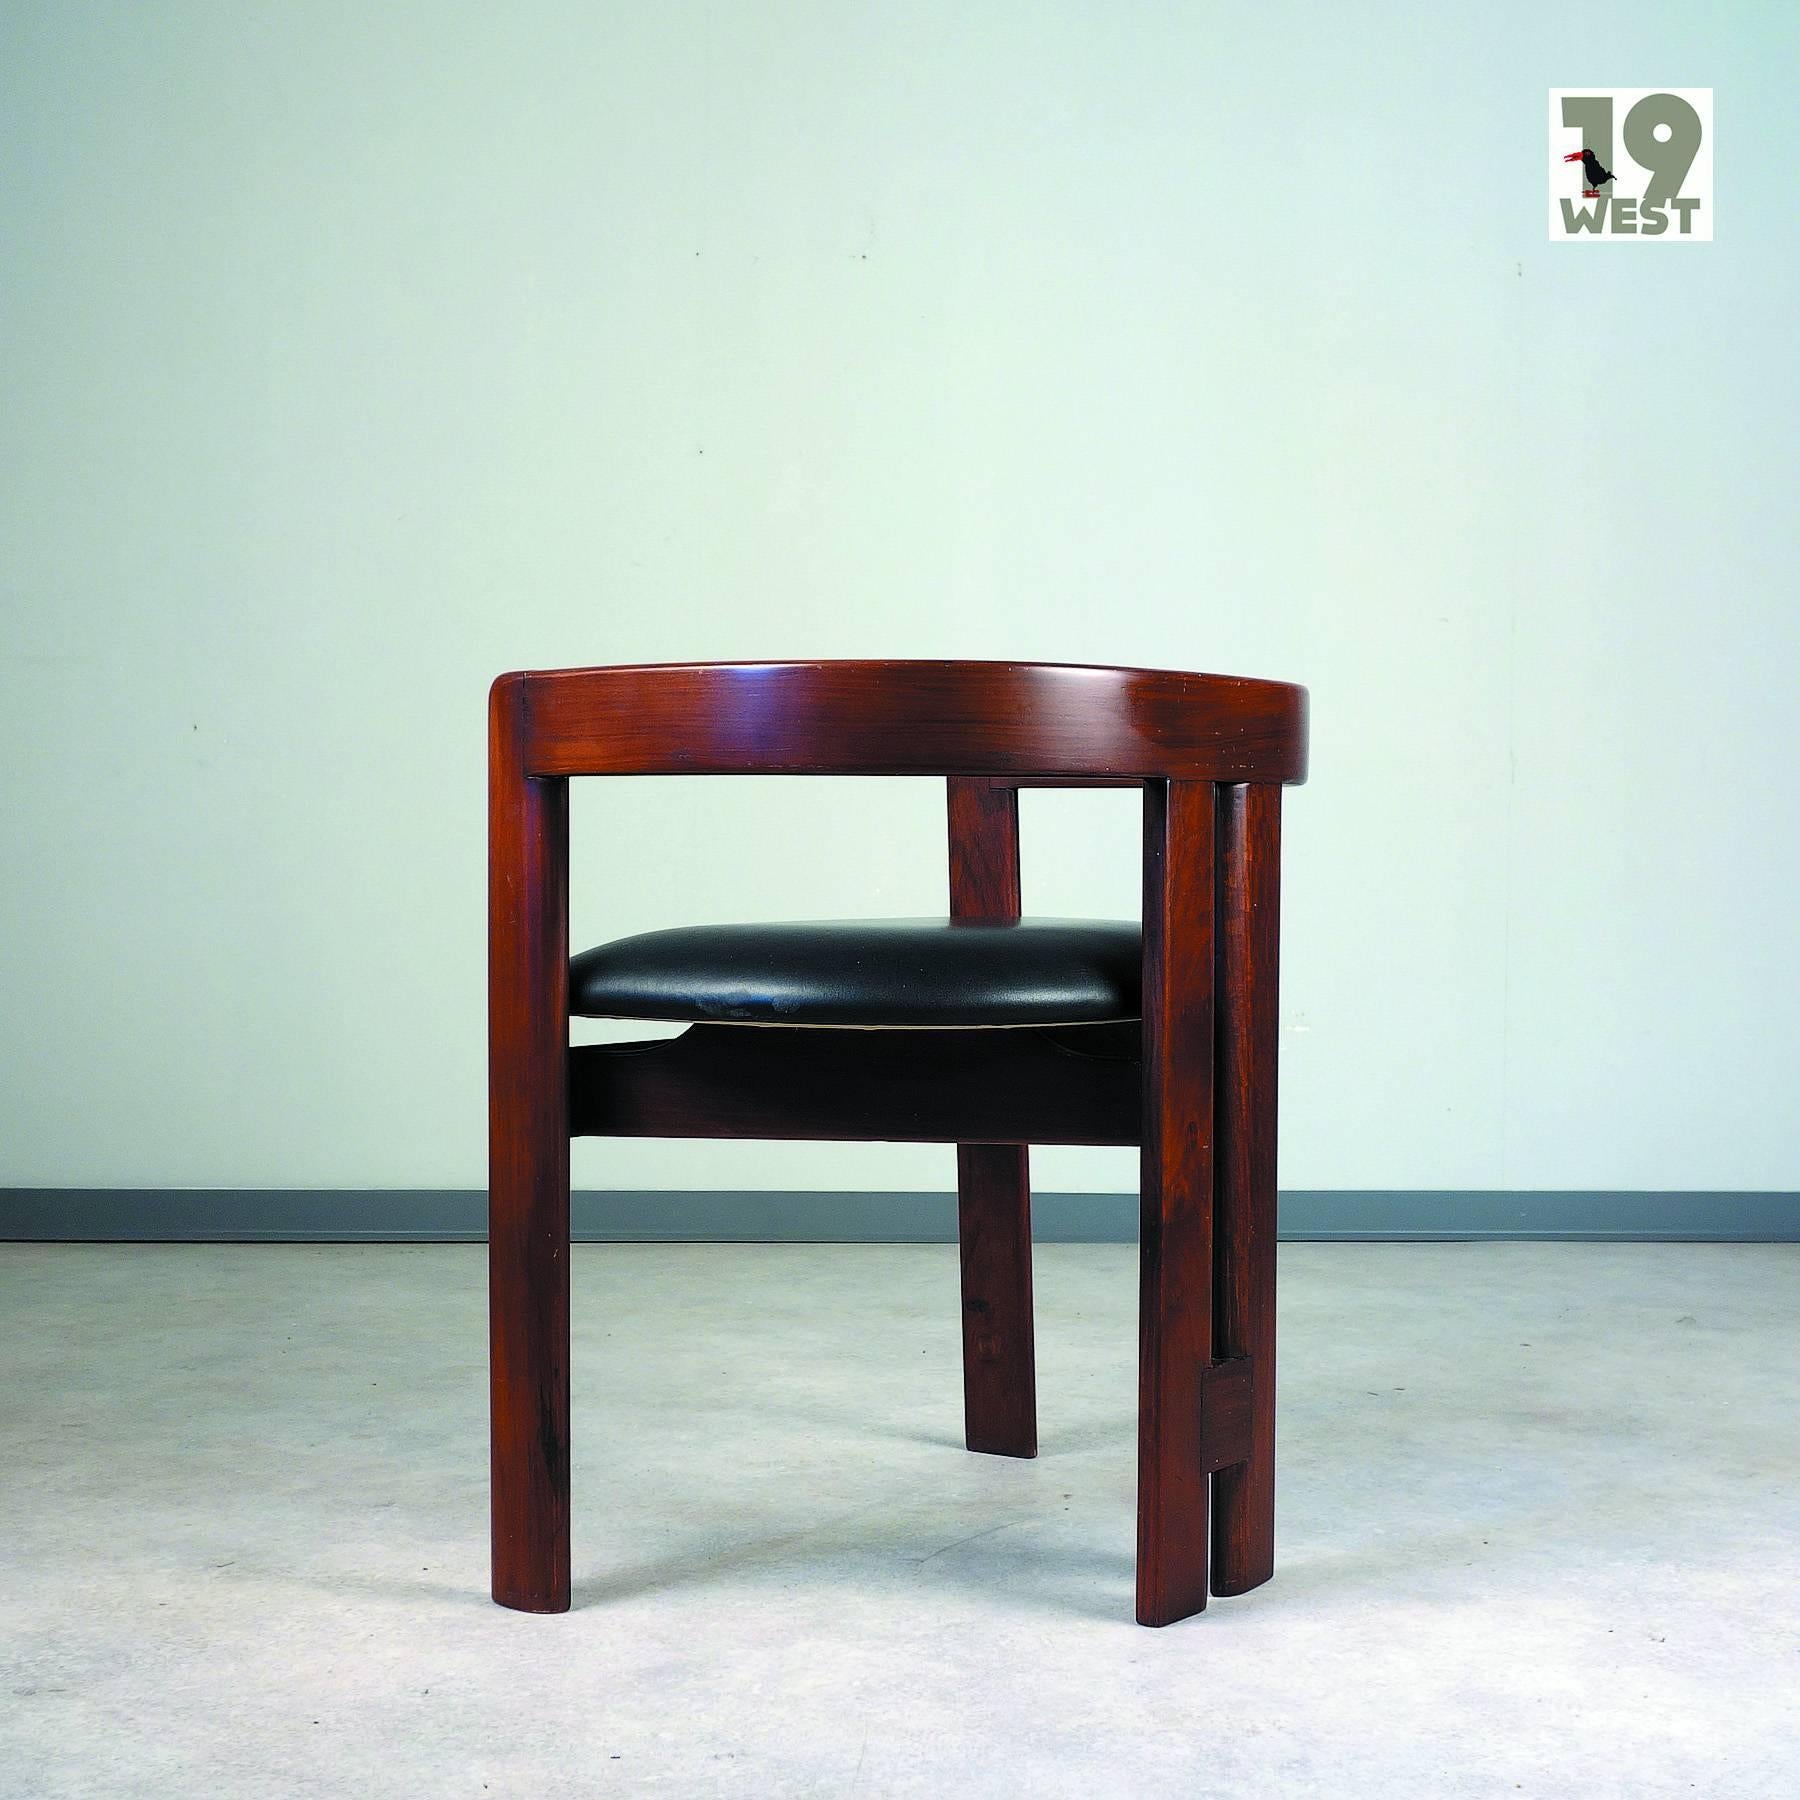 20th Century Pigreco Armchair, Designed by Afra & Tobia Scarpa, Manufactured by Gavina